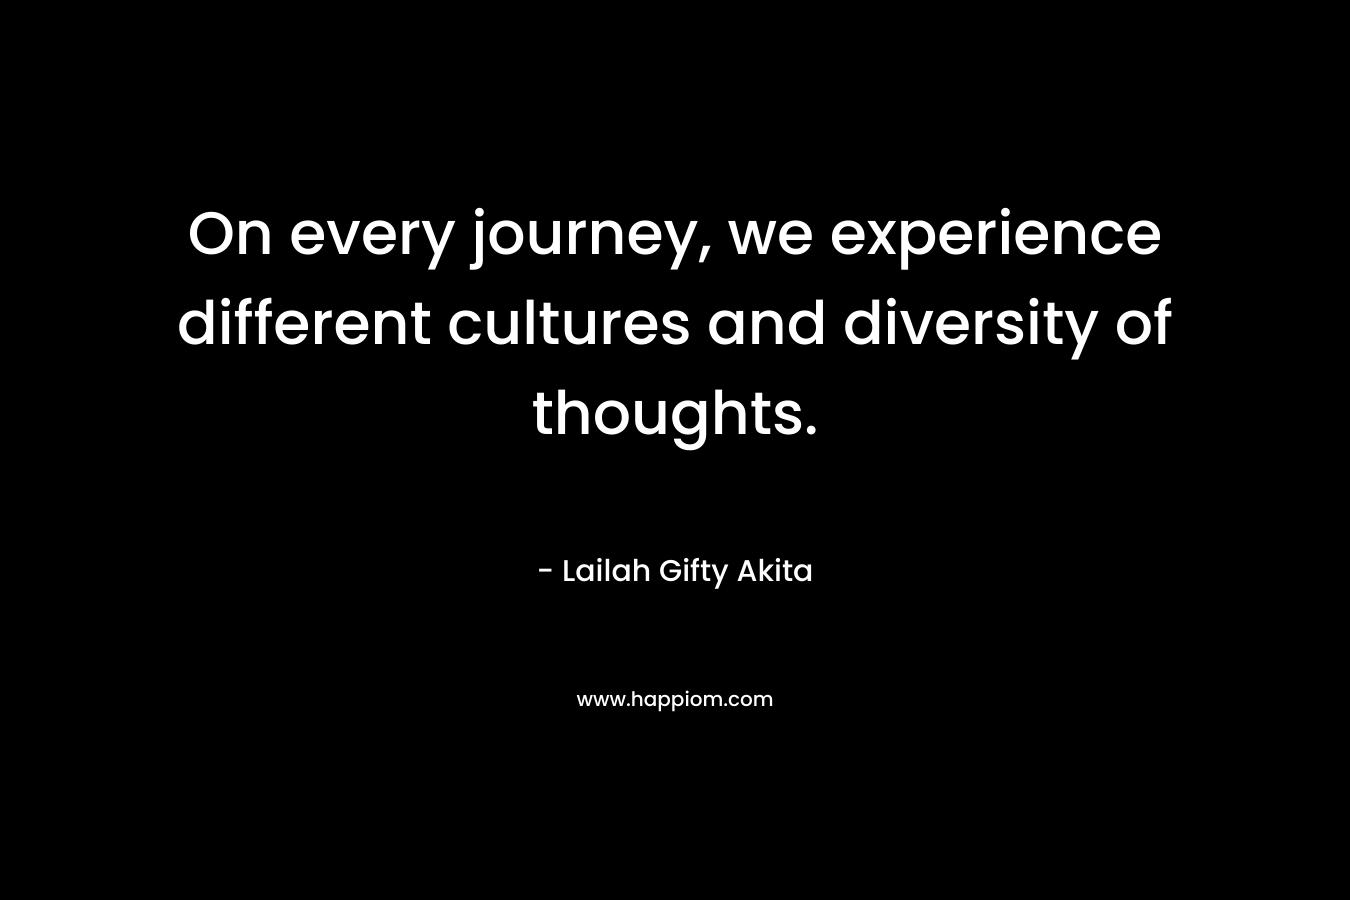 On every journey, we experience different cultures and diversity of thoughts. – Lailah Gifty Akita